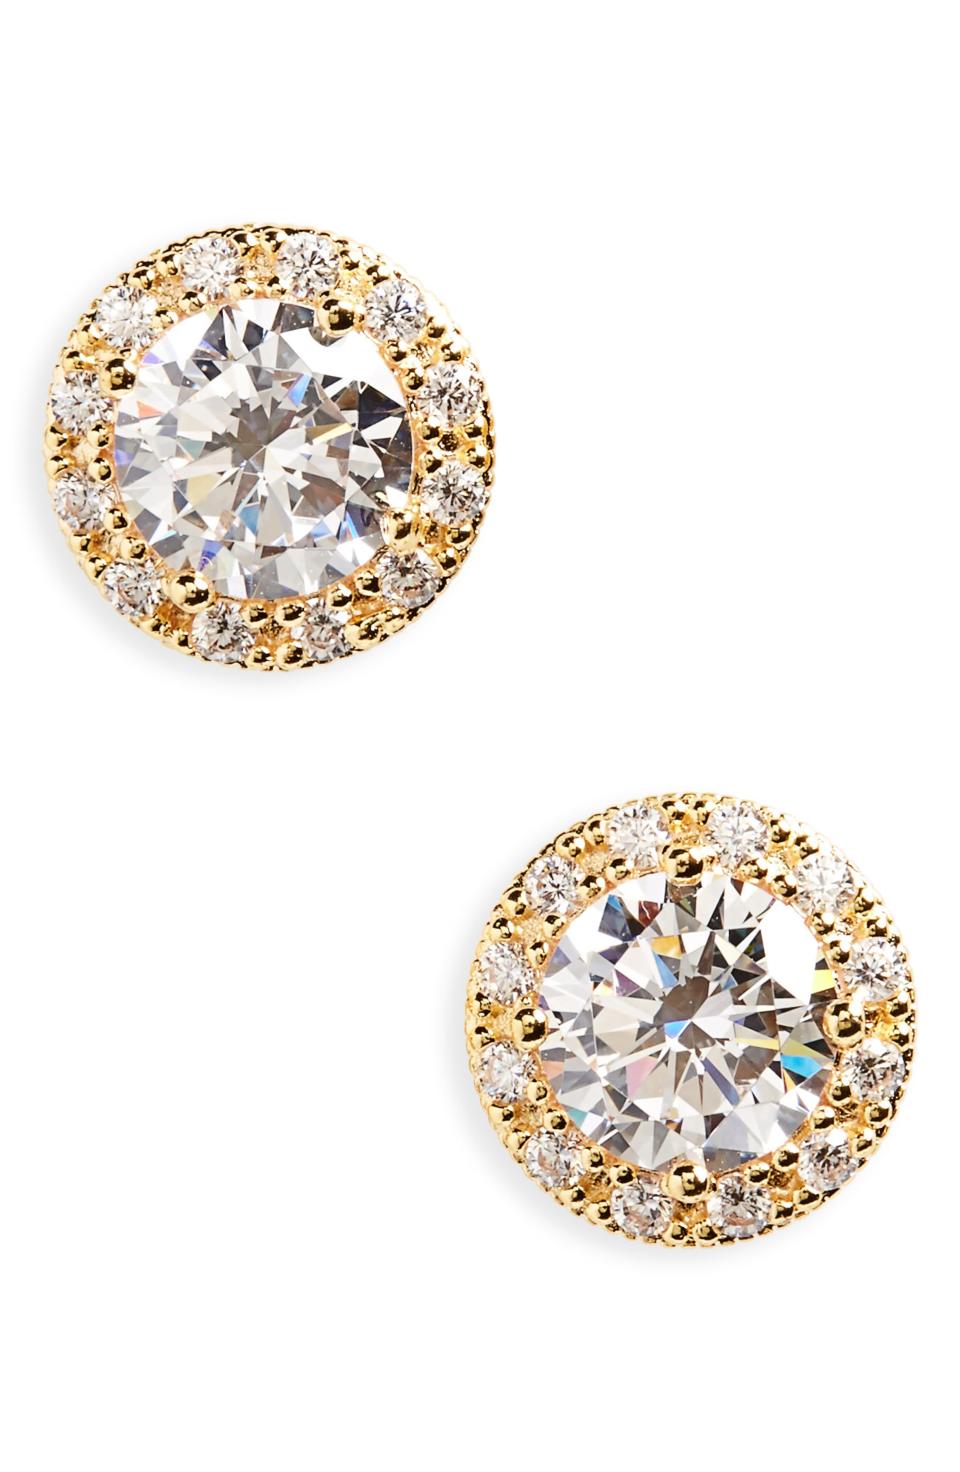 These earrings bring the bling (but under $100). (Photo: Nordstrom)